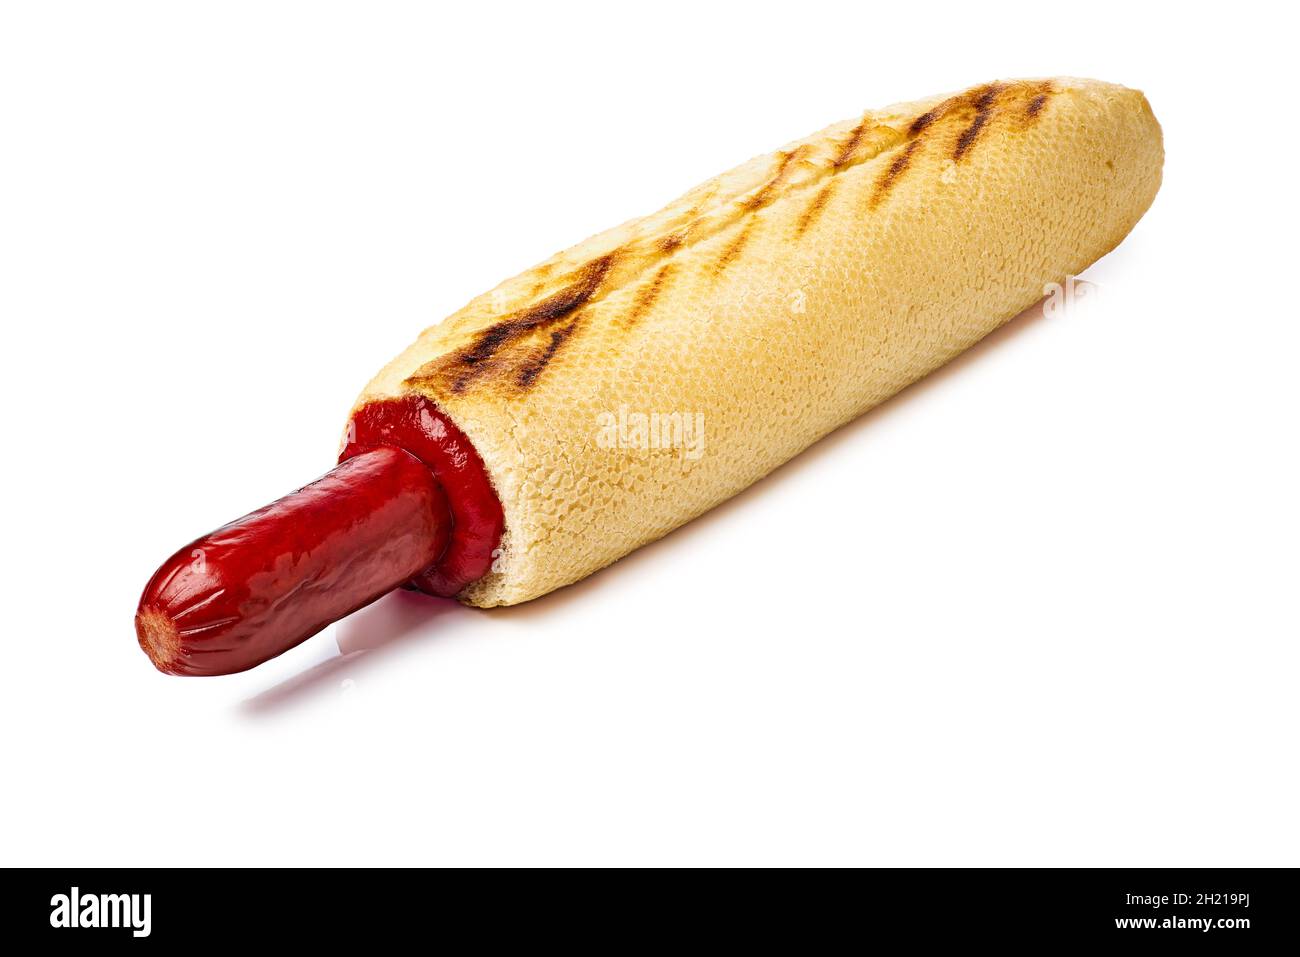 French hot dog with ketchup on white background Stock Photo